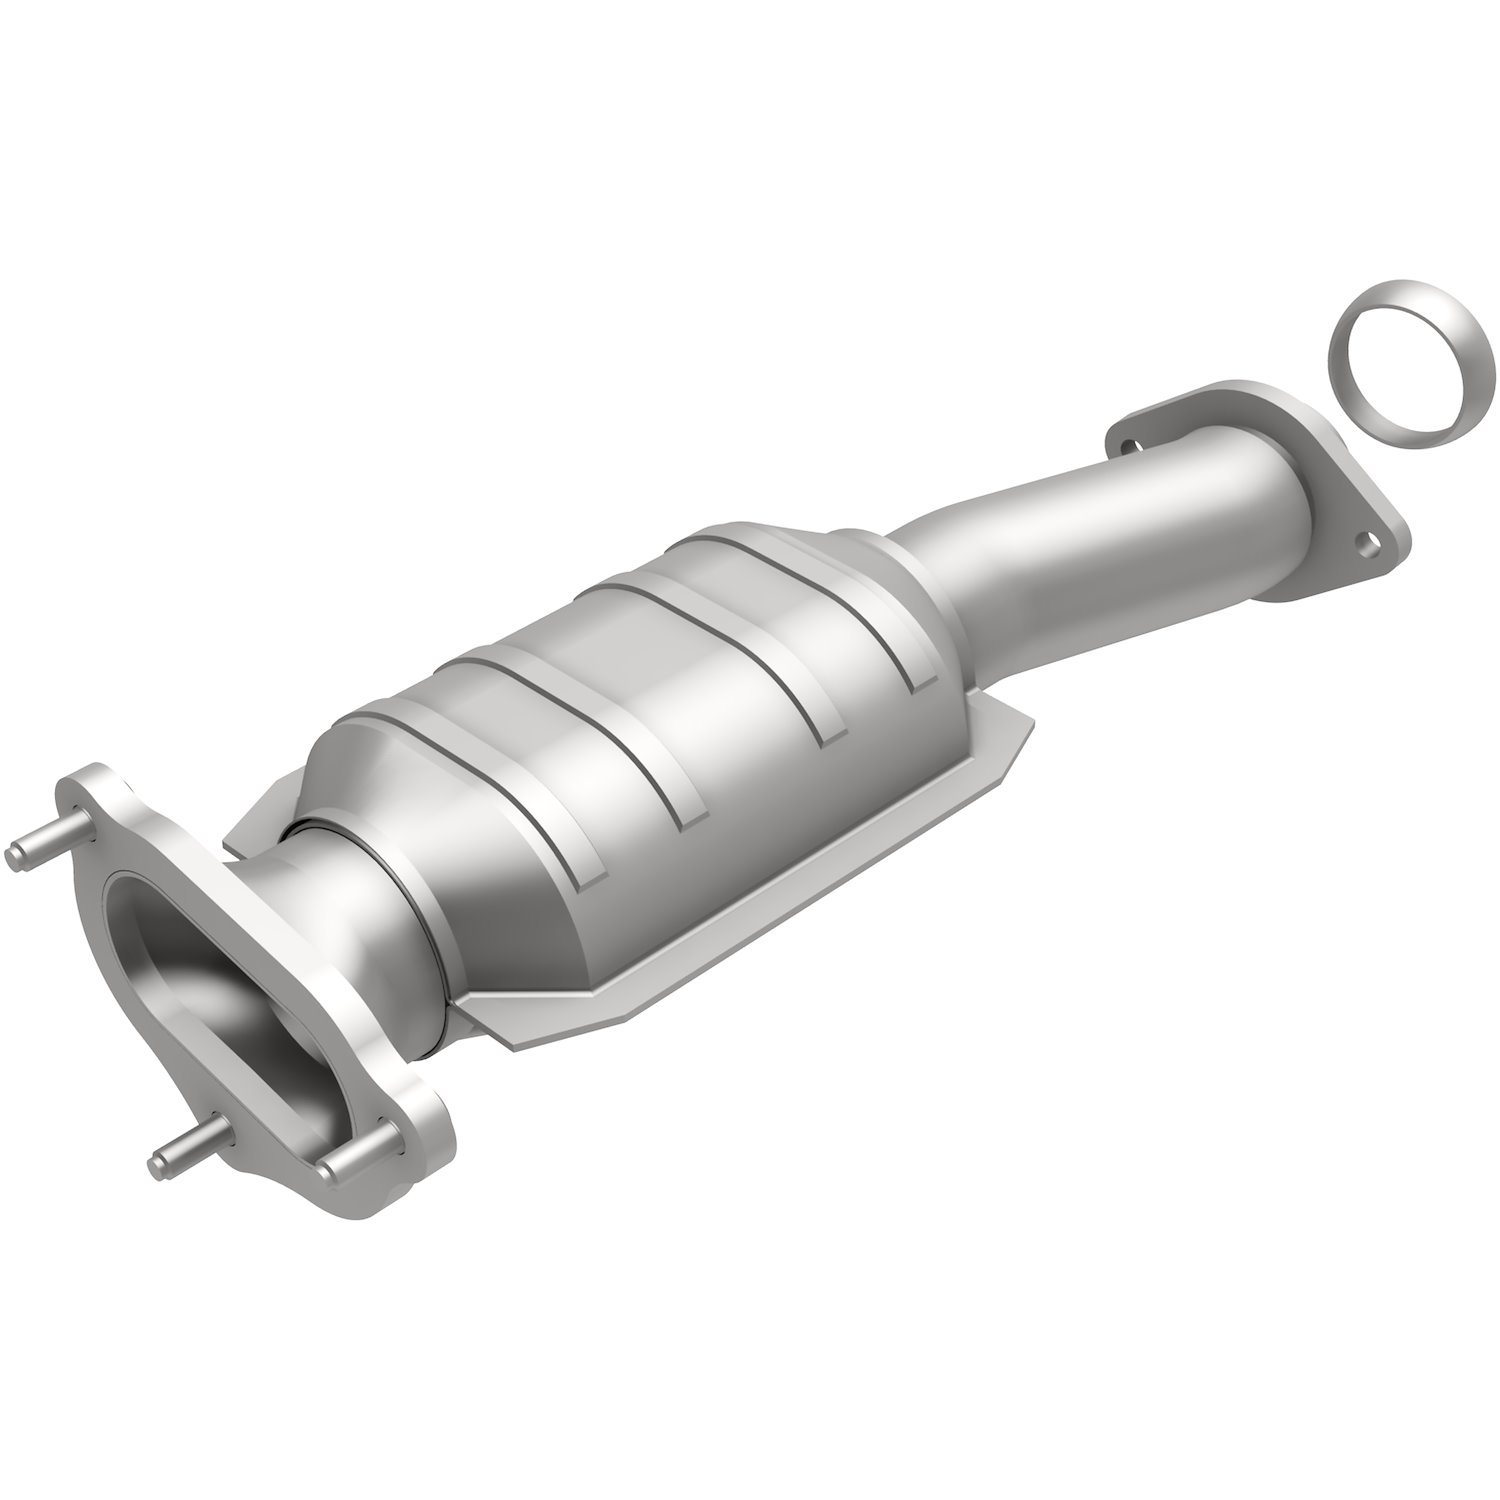 HM Grade Federal / EPA Compliant Direct-Fit Catalytic Converter 93641